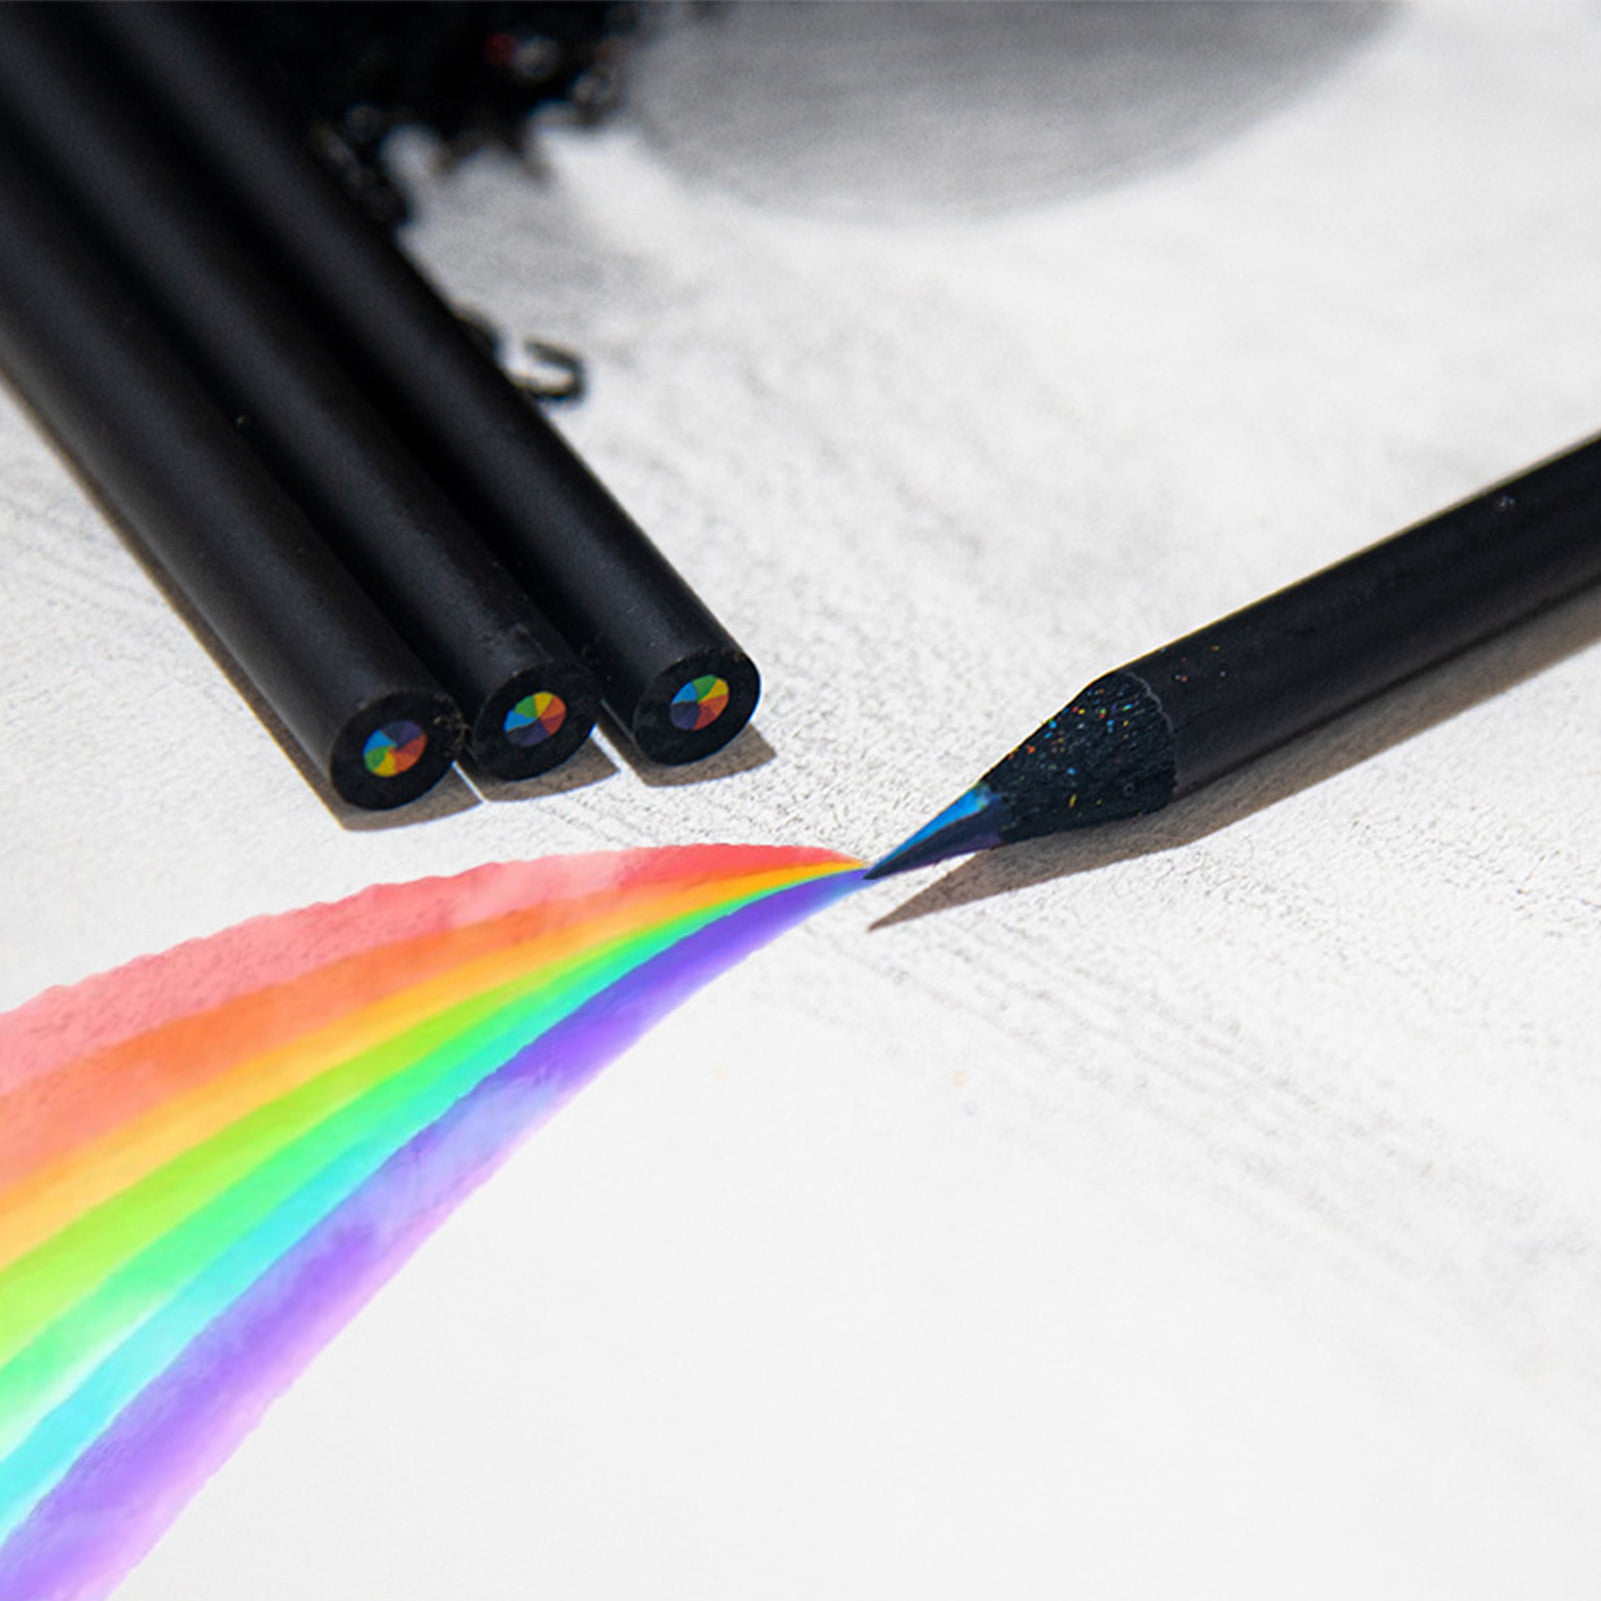 ThEast Black Wooden Rainbow Colored Pencils, 7 Color in 1 Rainbow Pencils, Art Supplies for Kids and Adults, Assorted Colors for Drawing Coloring